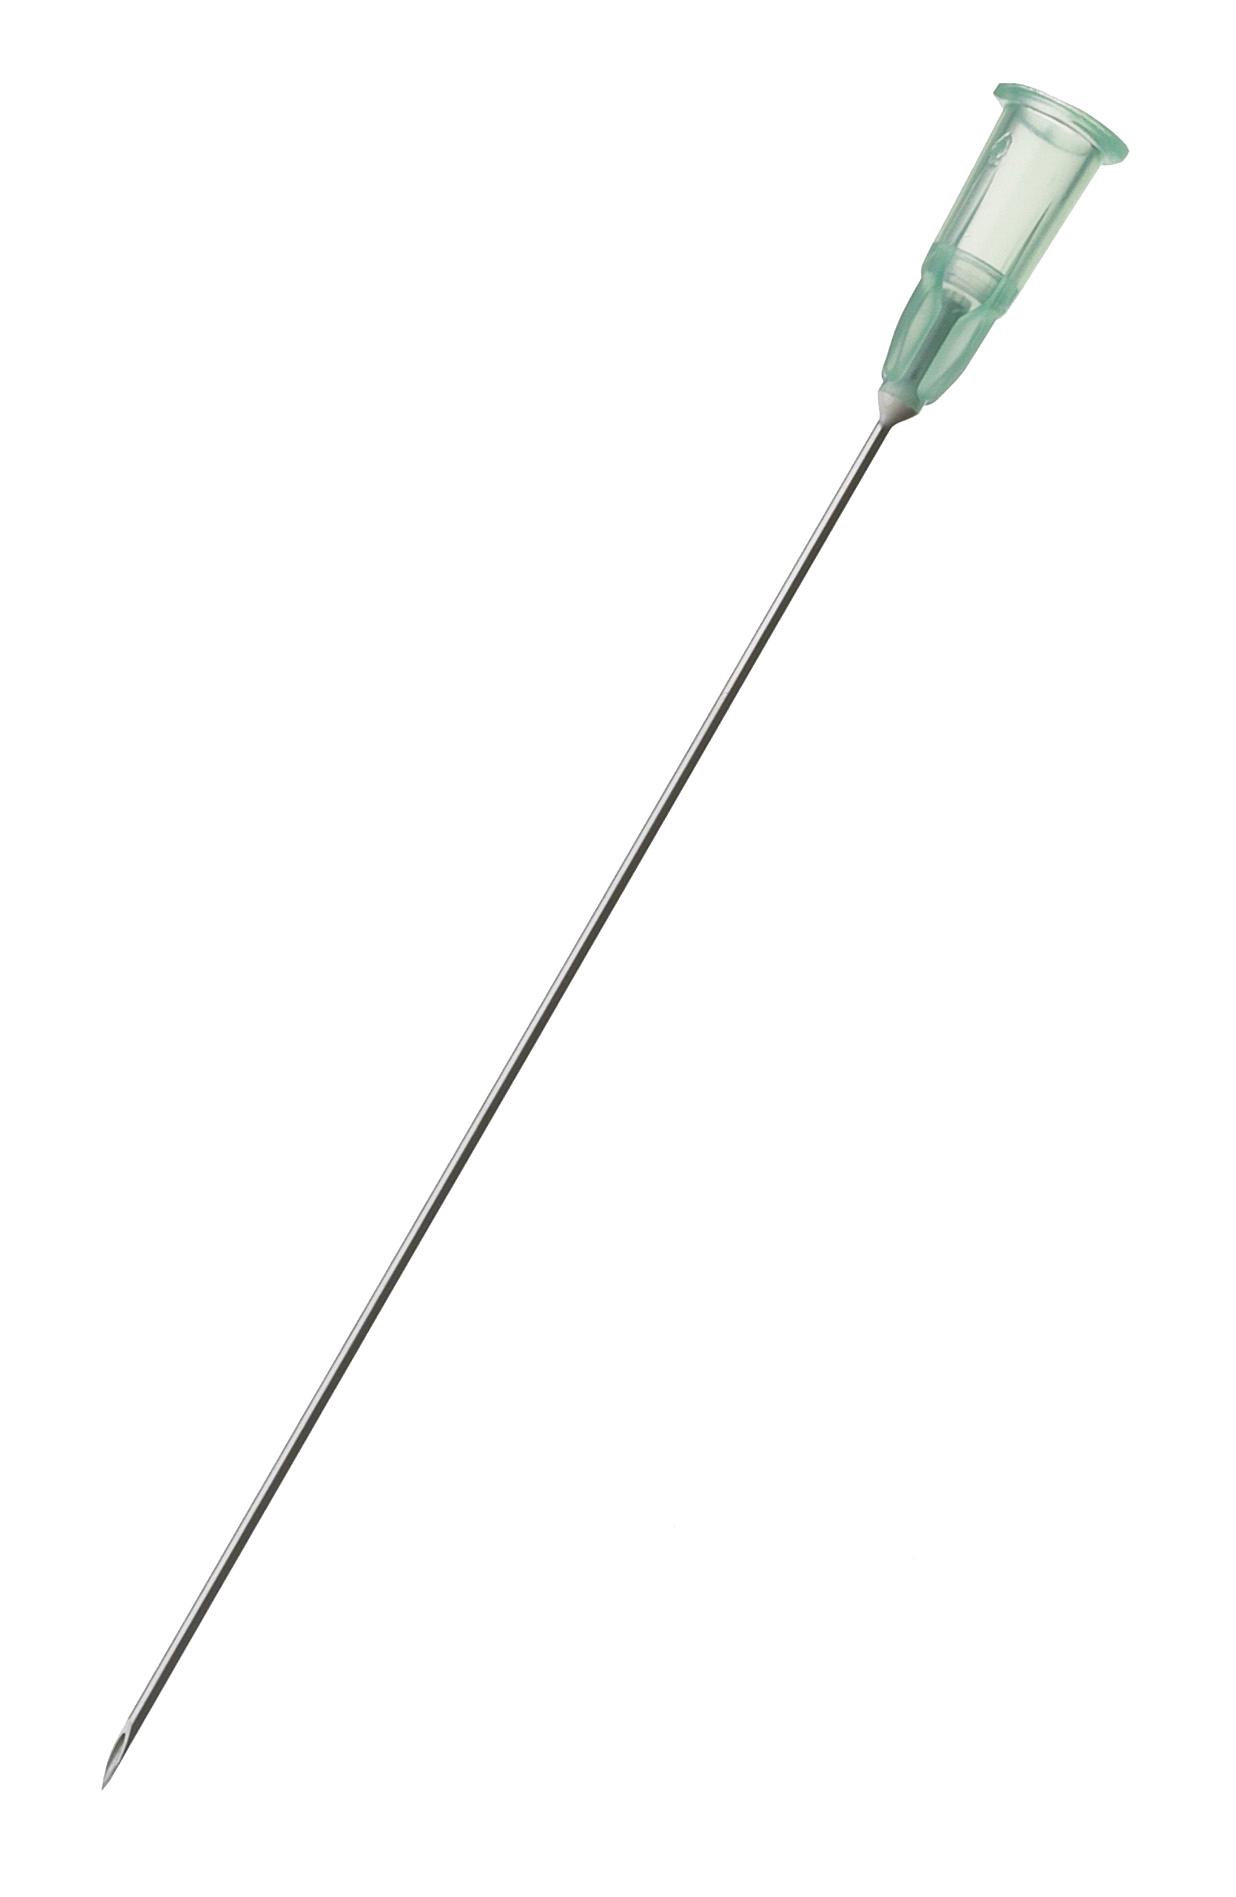 Needle with Luer connector | Metrohm